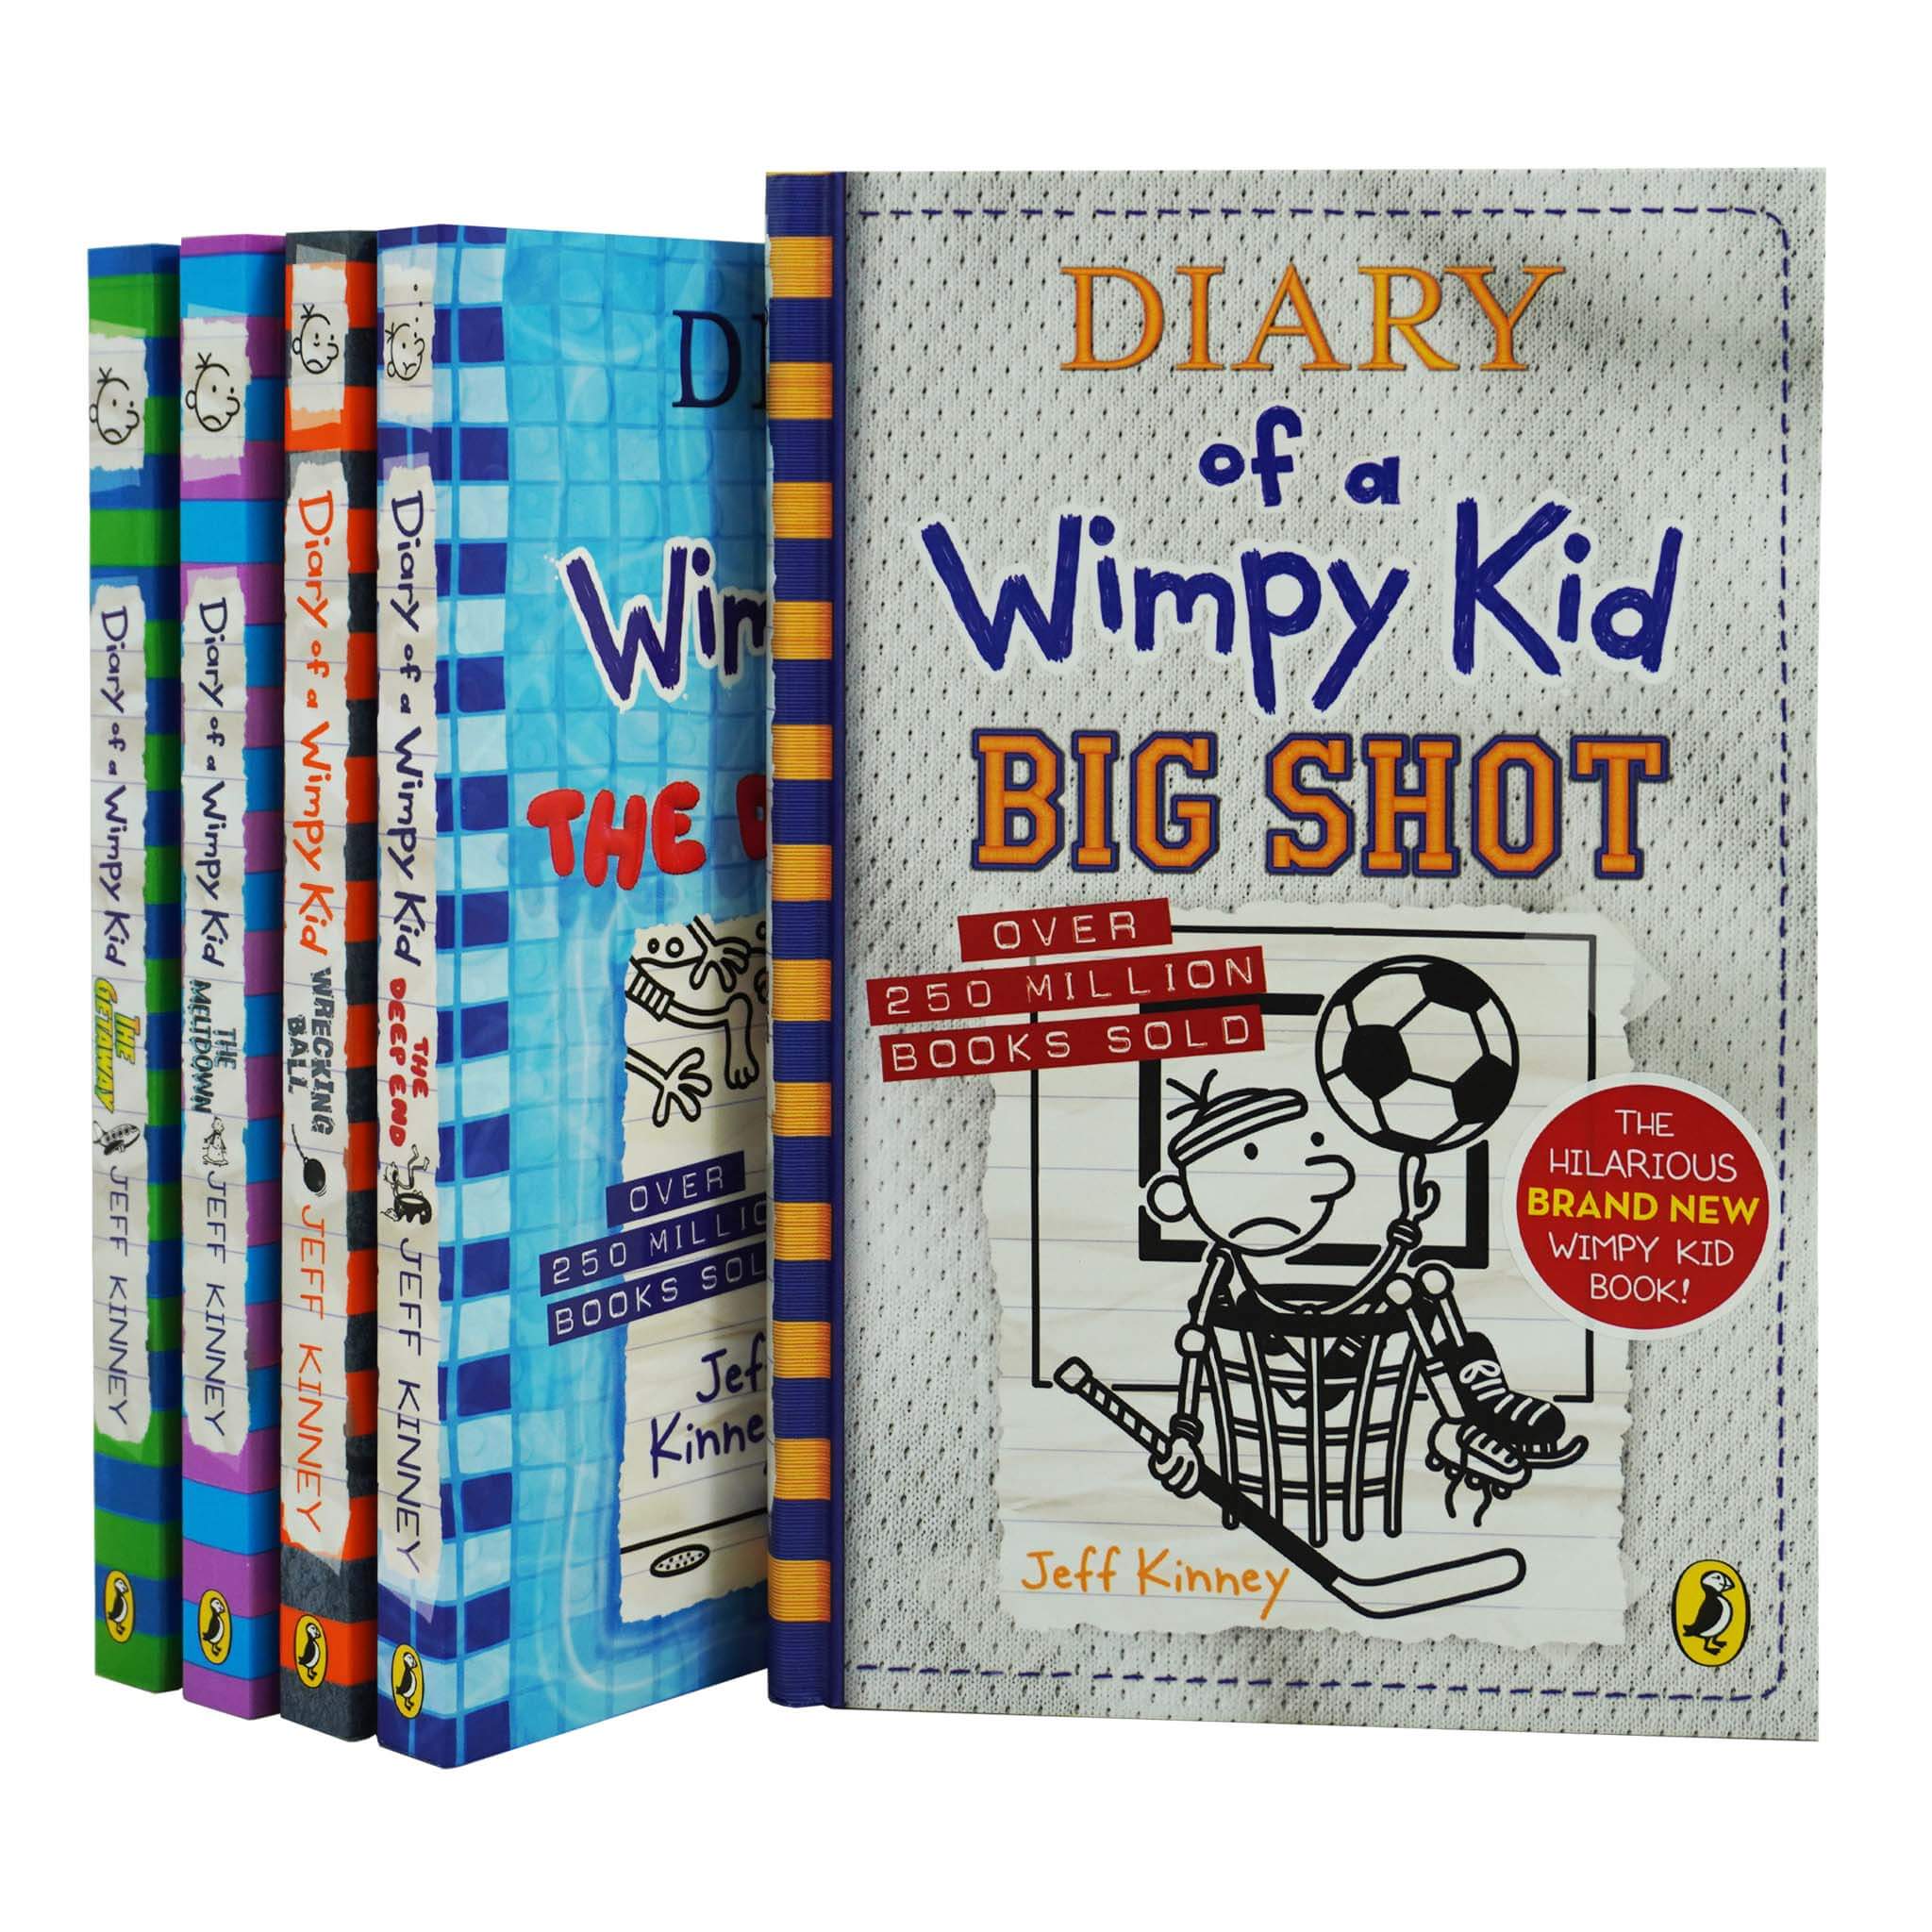 Diary of a Wimpy Kid: Book 16 - by Jeff Kinney (Hardcover)